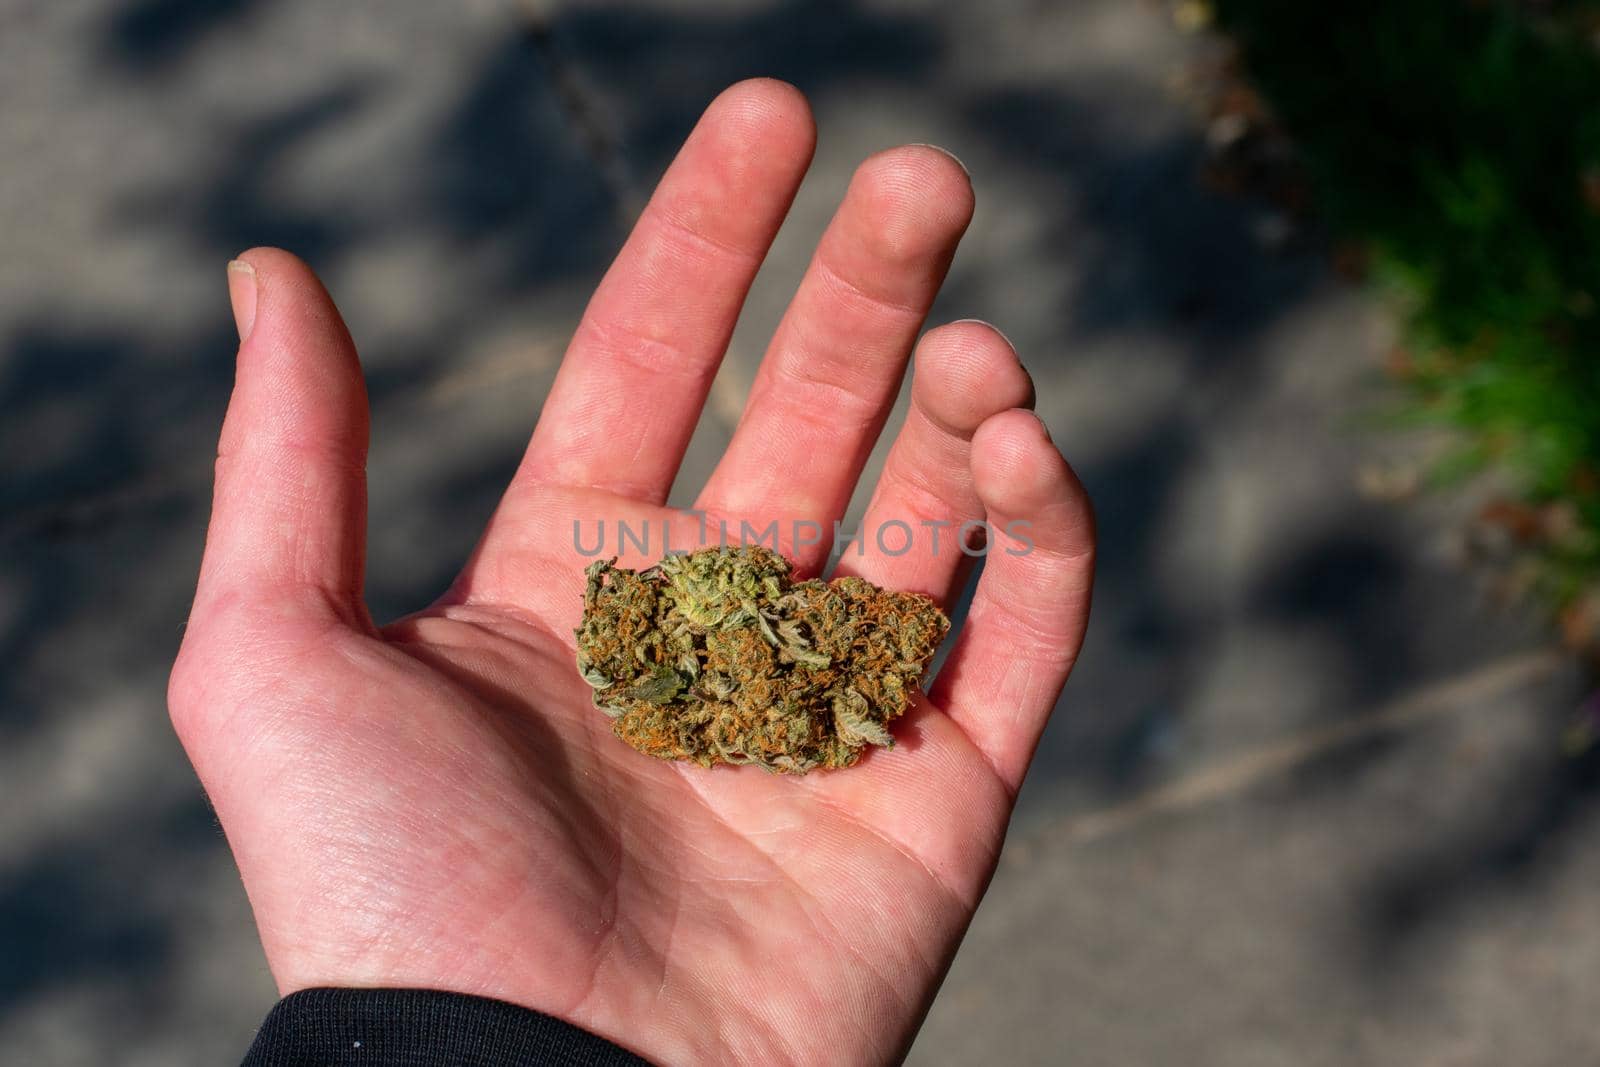 A Cannabis Nug in the Palm of a Hand With a Stone Path in the Background by bju12290